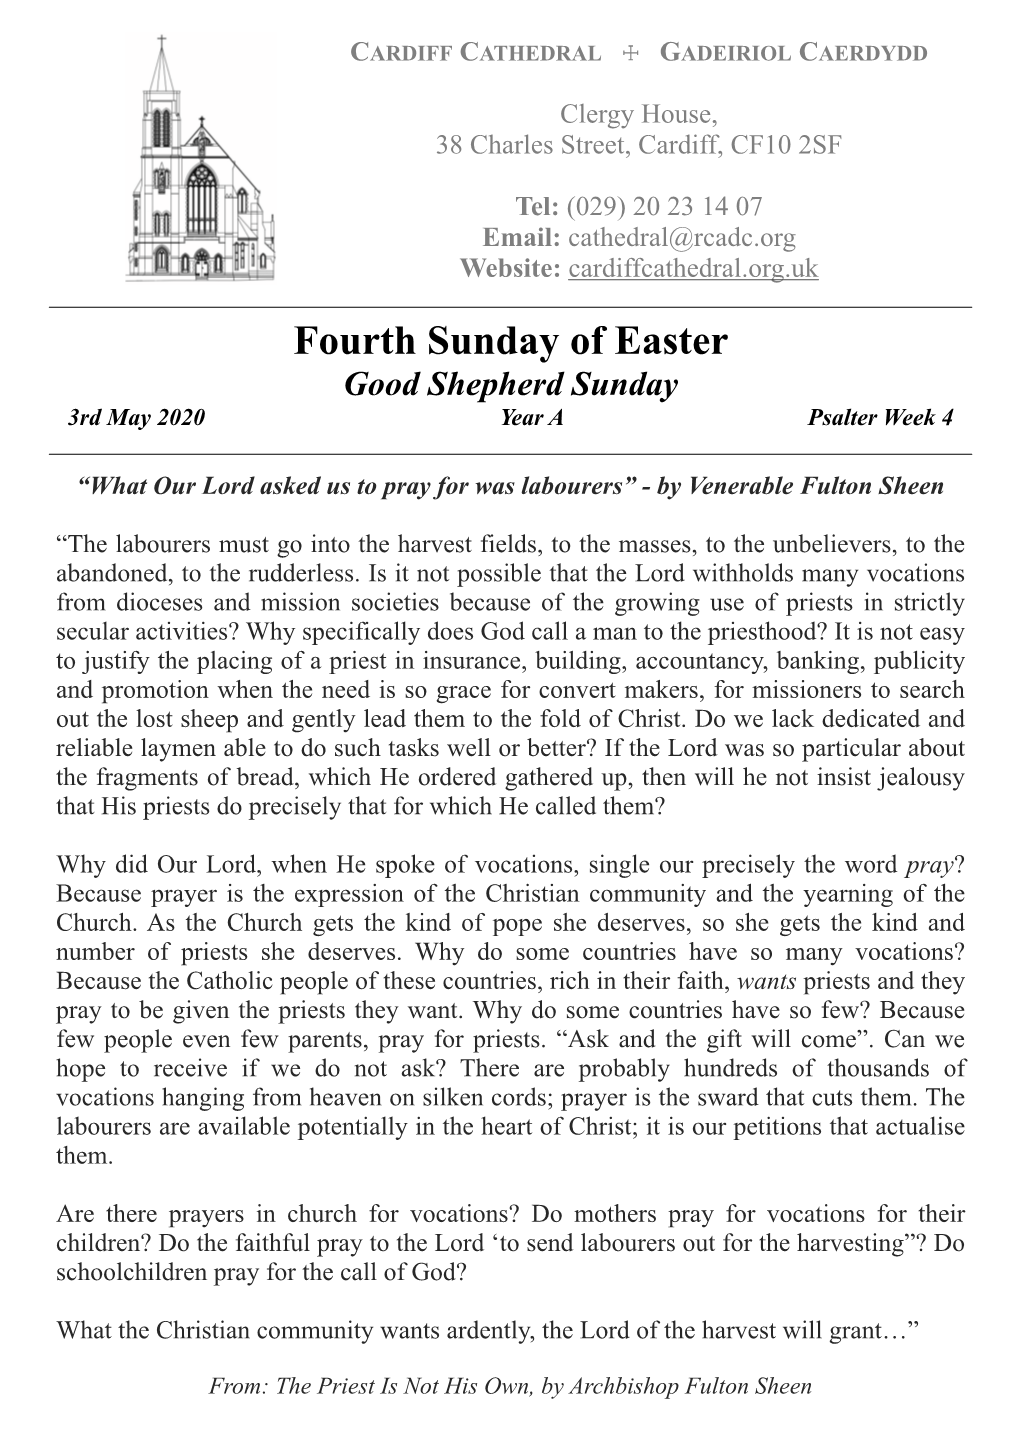 Fourth Sunday of Easter Good Shepherd Sunday 3Rd May 2020 Year a Psalter Week 4